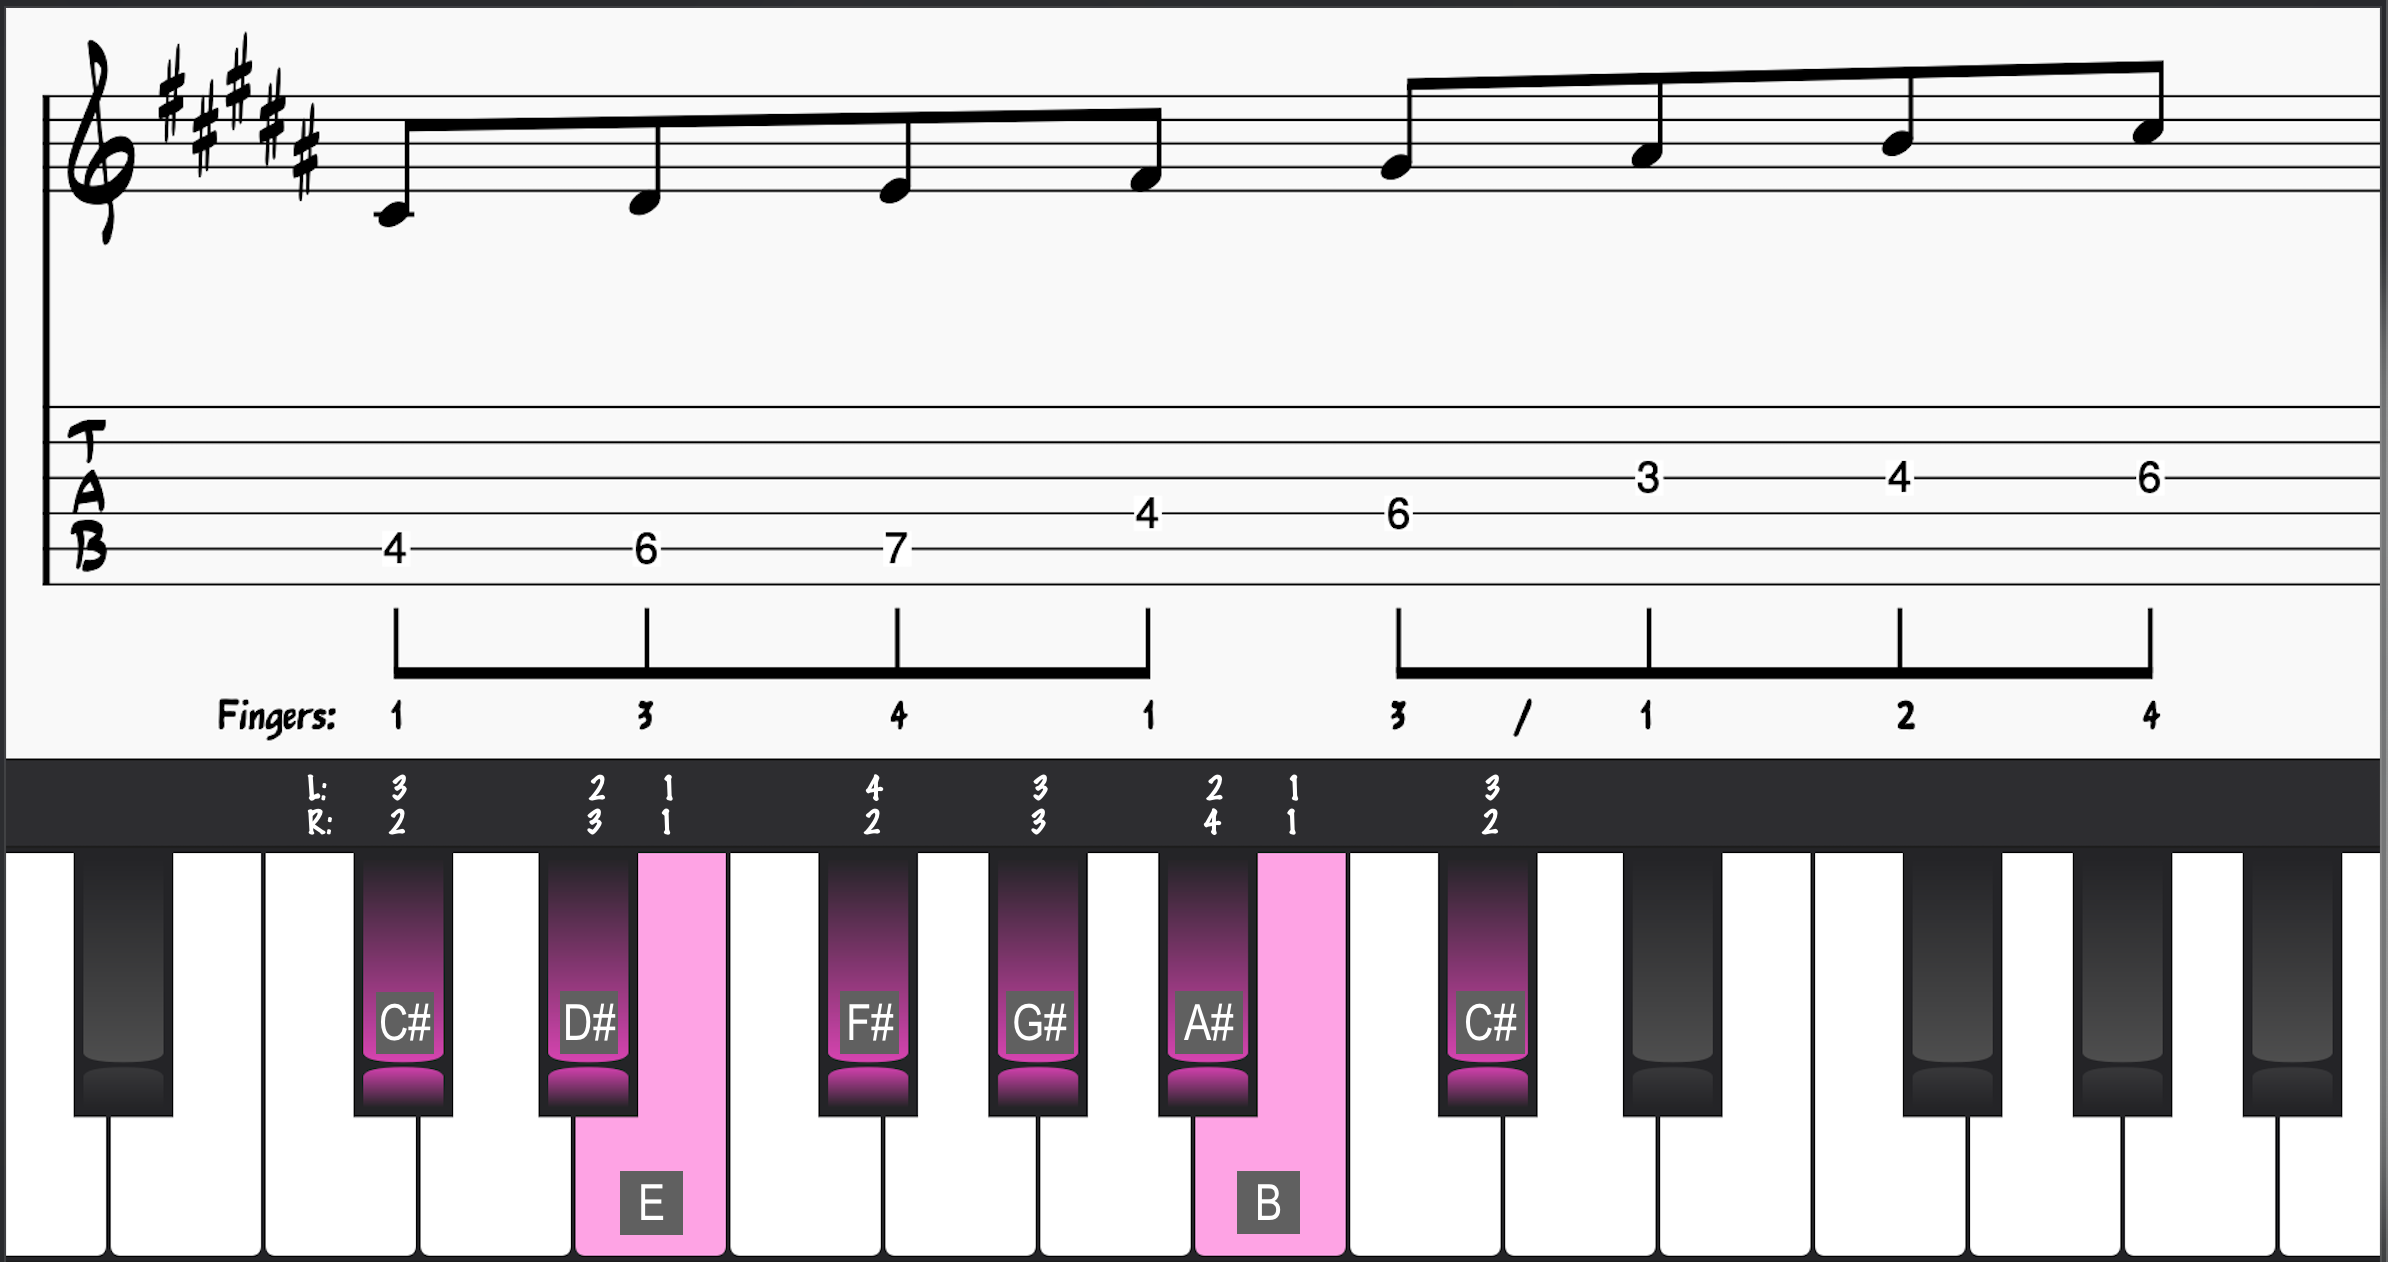 C# Dorian Mode with Guitar and Piano Fingerings